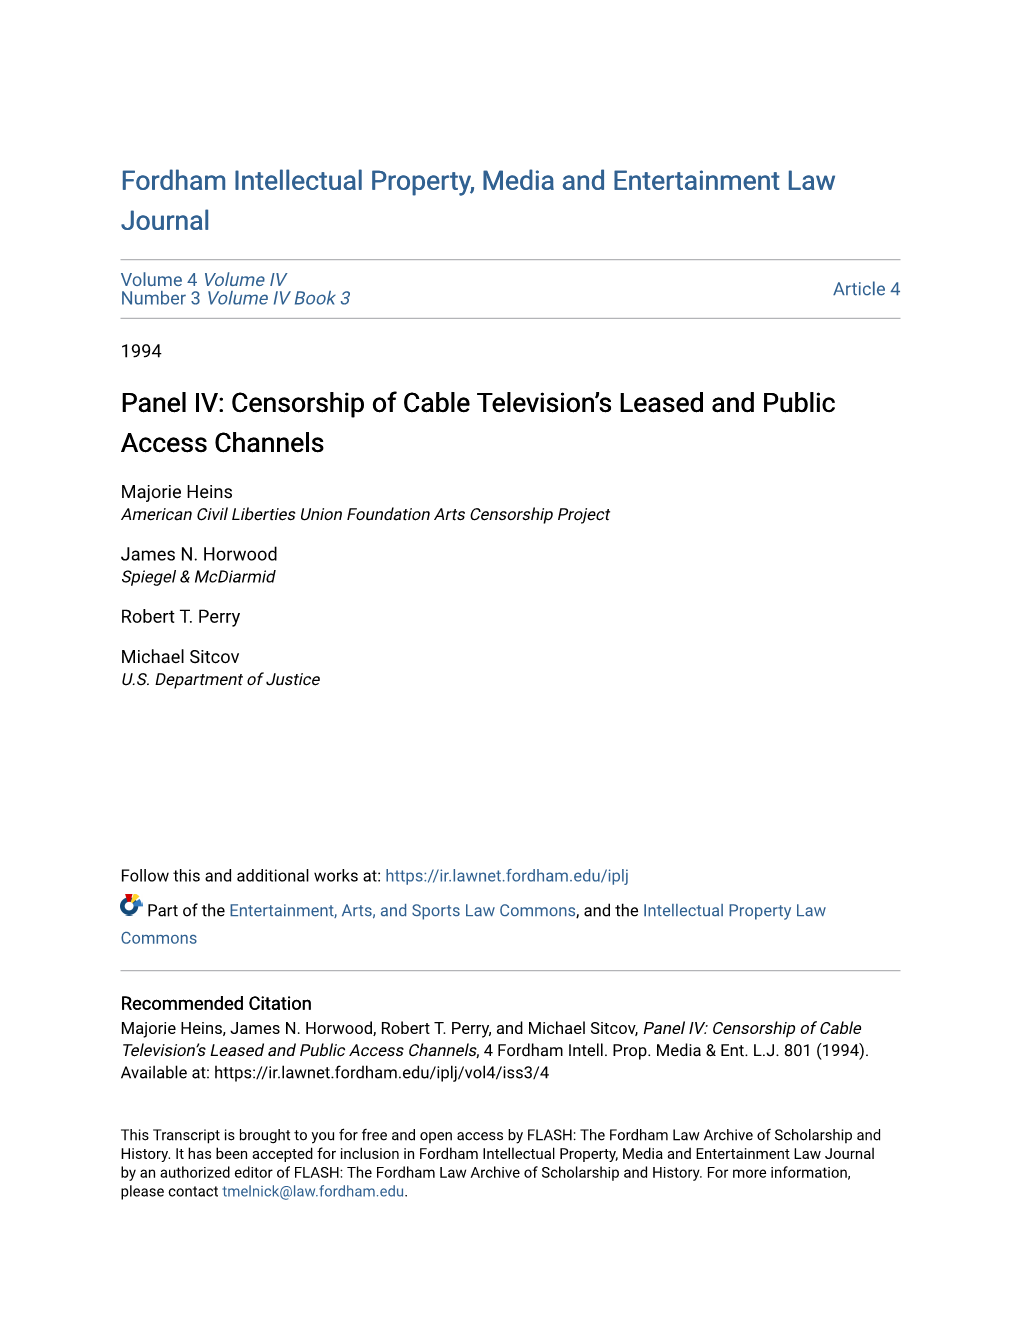 Censorship of Cable Television's Leased and Public Access Channels